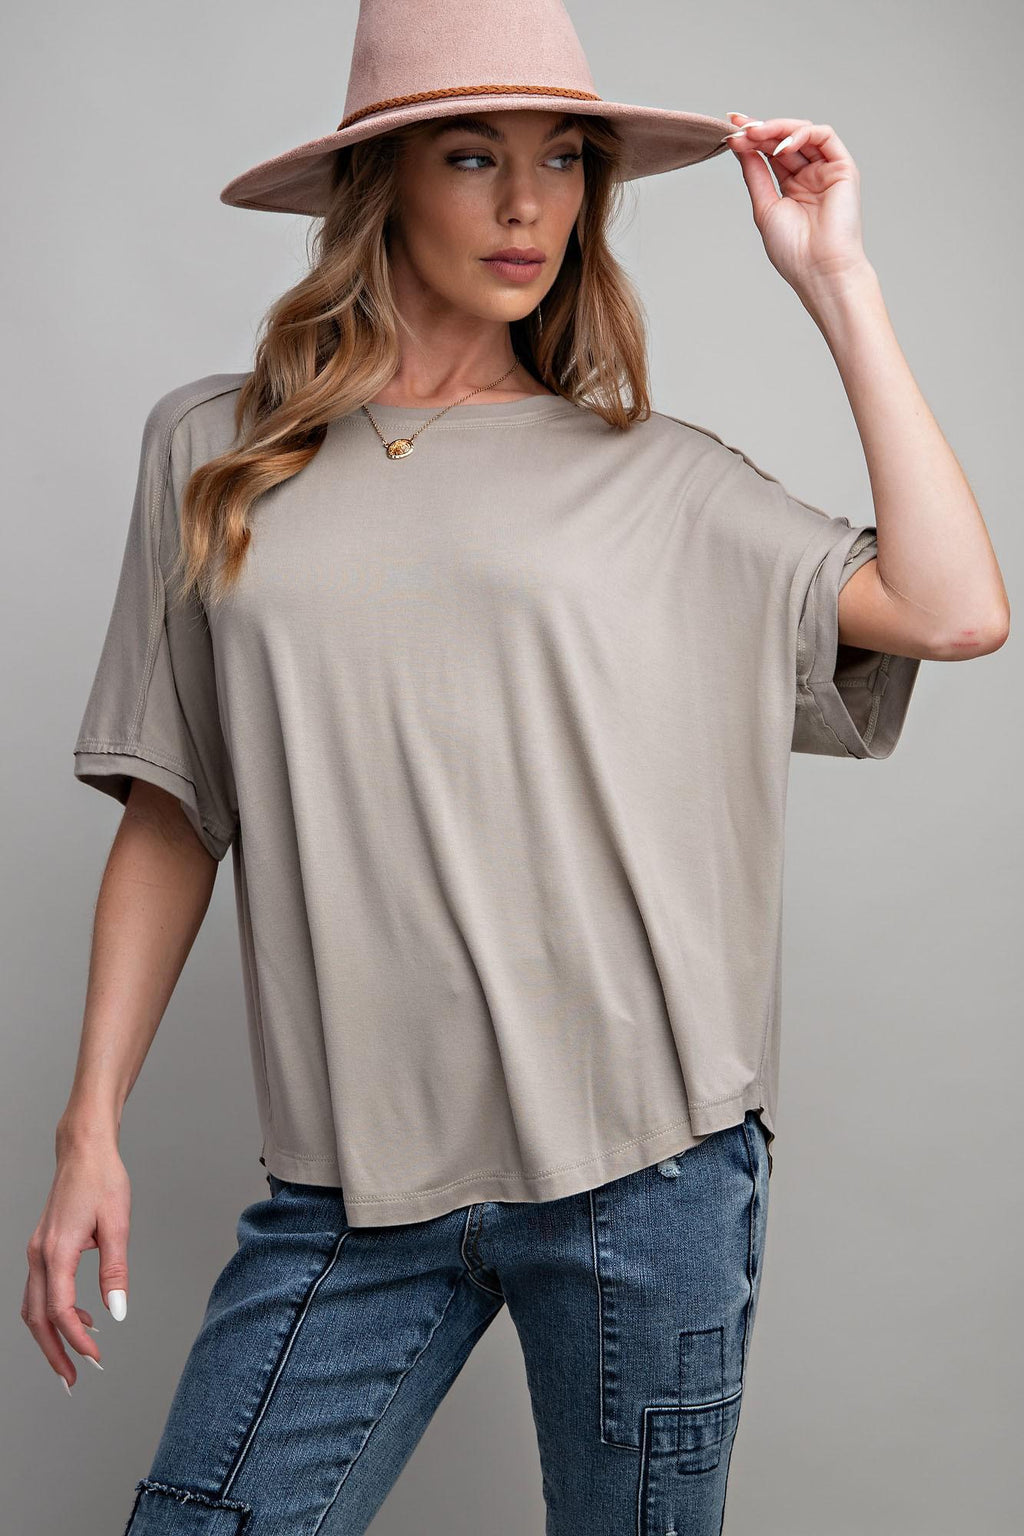 Eggshell Washed Rayon Knit Tunic Top